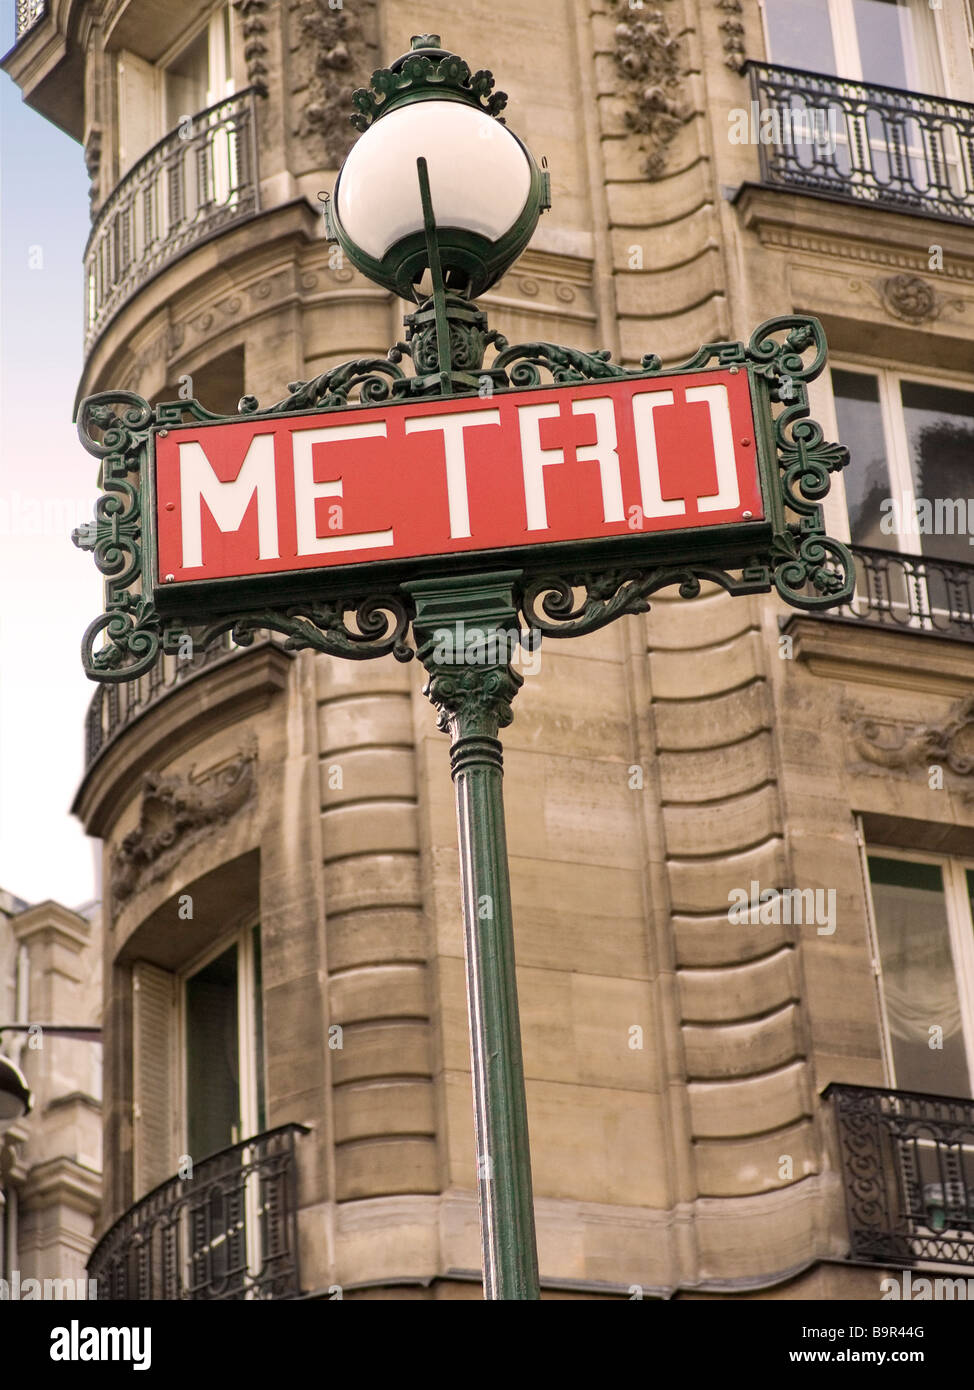 Iconic Metro underground sign with building in the background, Paris France Stock Photo